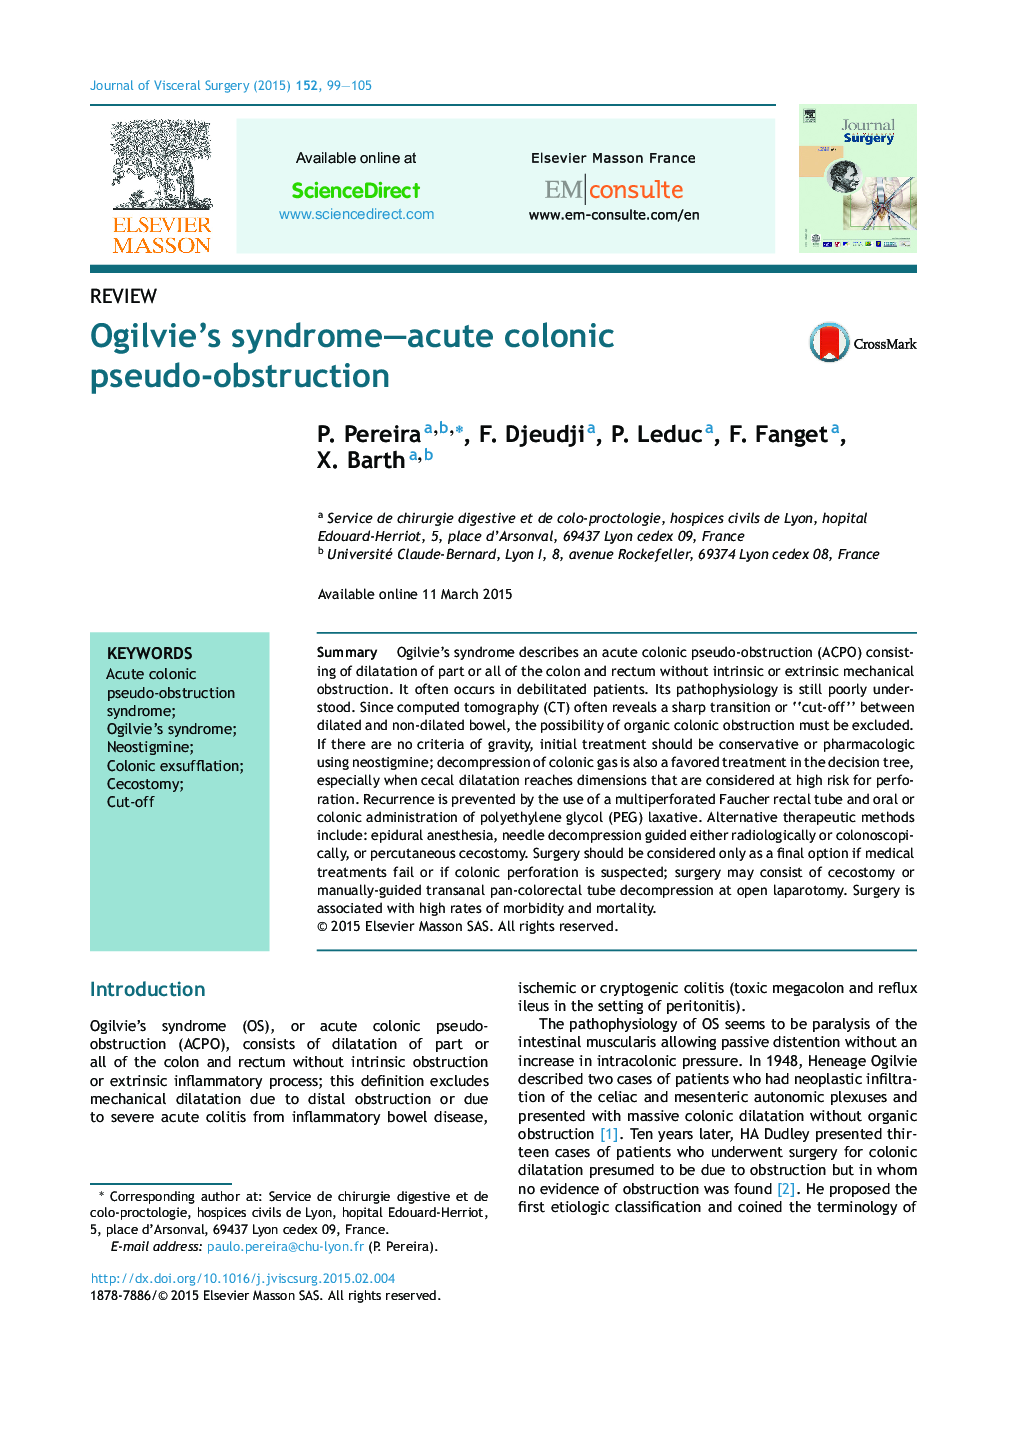 ReviewOgilvie's syndrome-acute colonic pseudo-obstruction